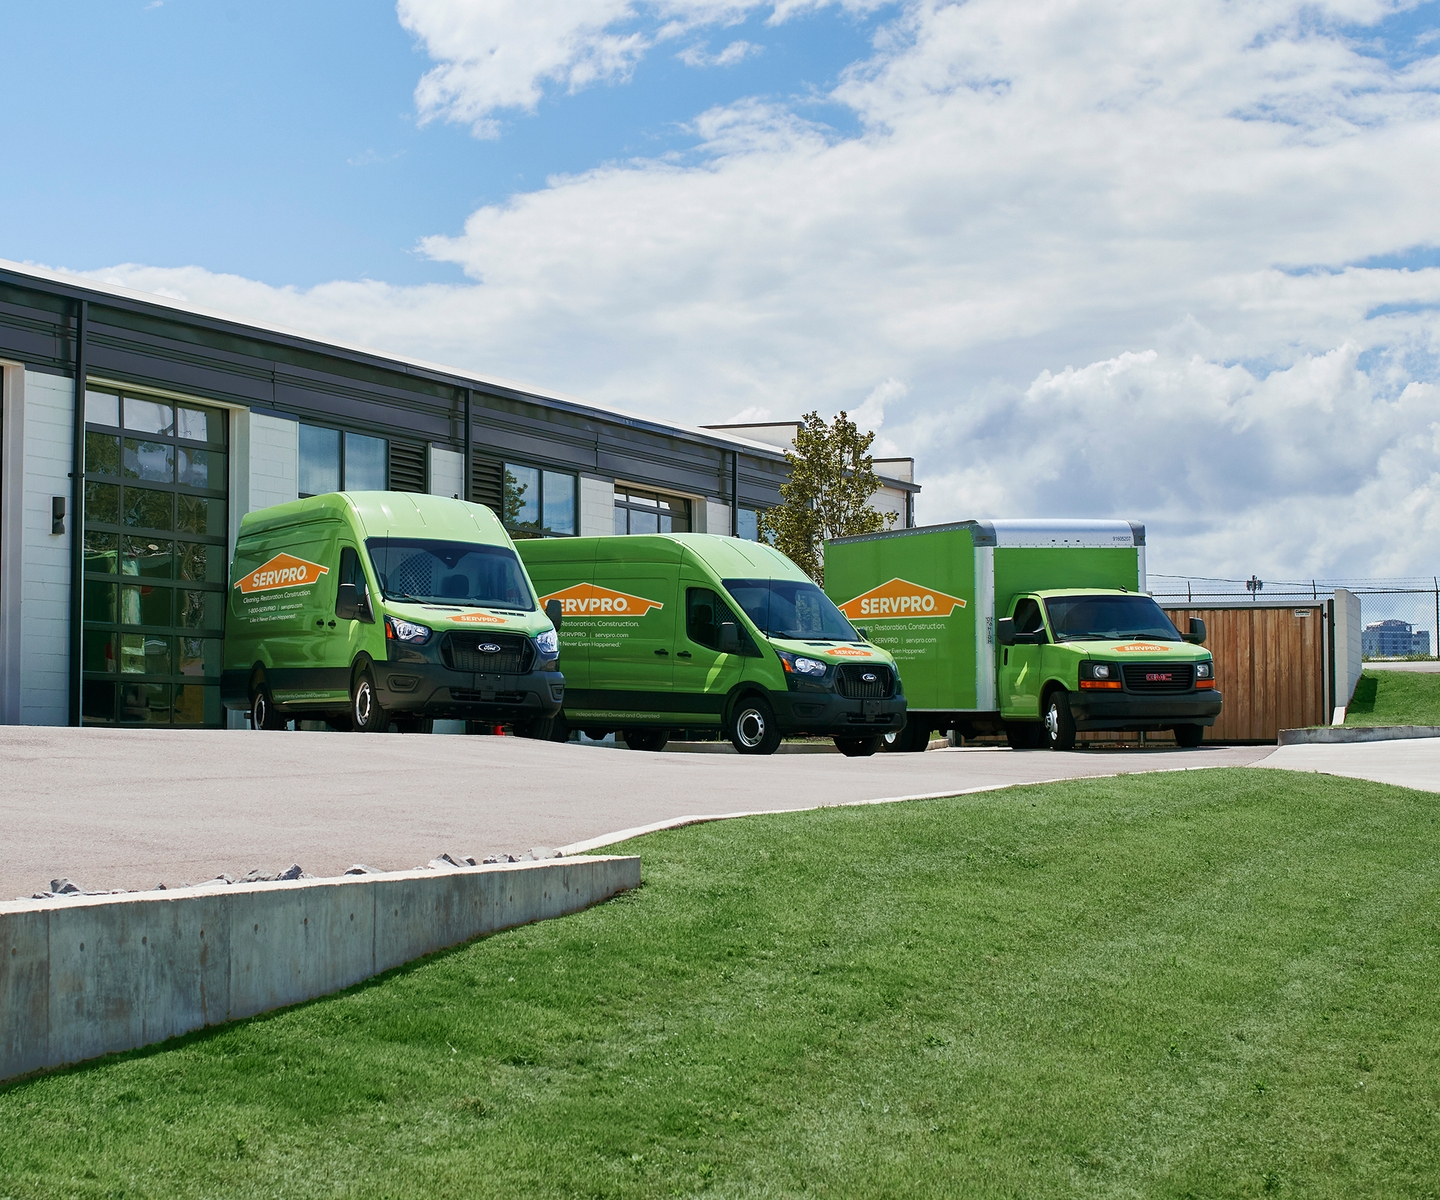 2 SERVPRO vans and a SERVPRO truck parked by a building waiting to serve your commercial business needs